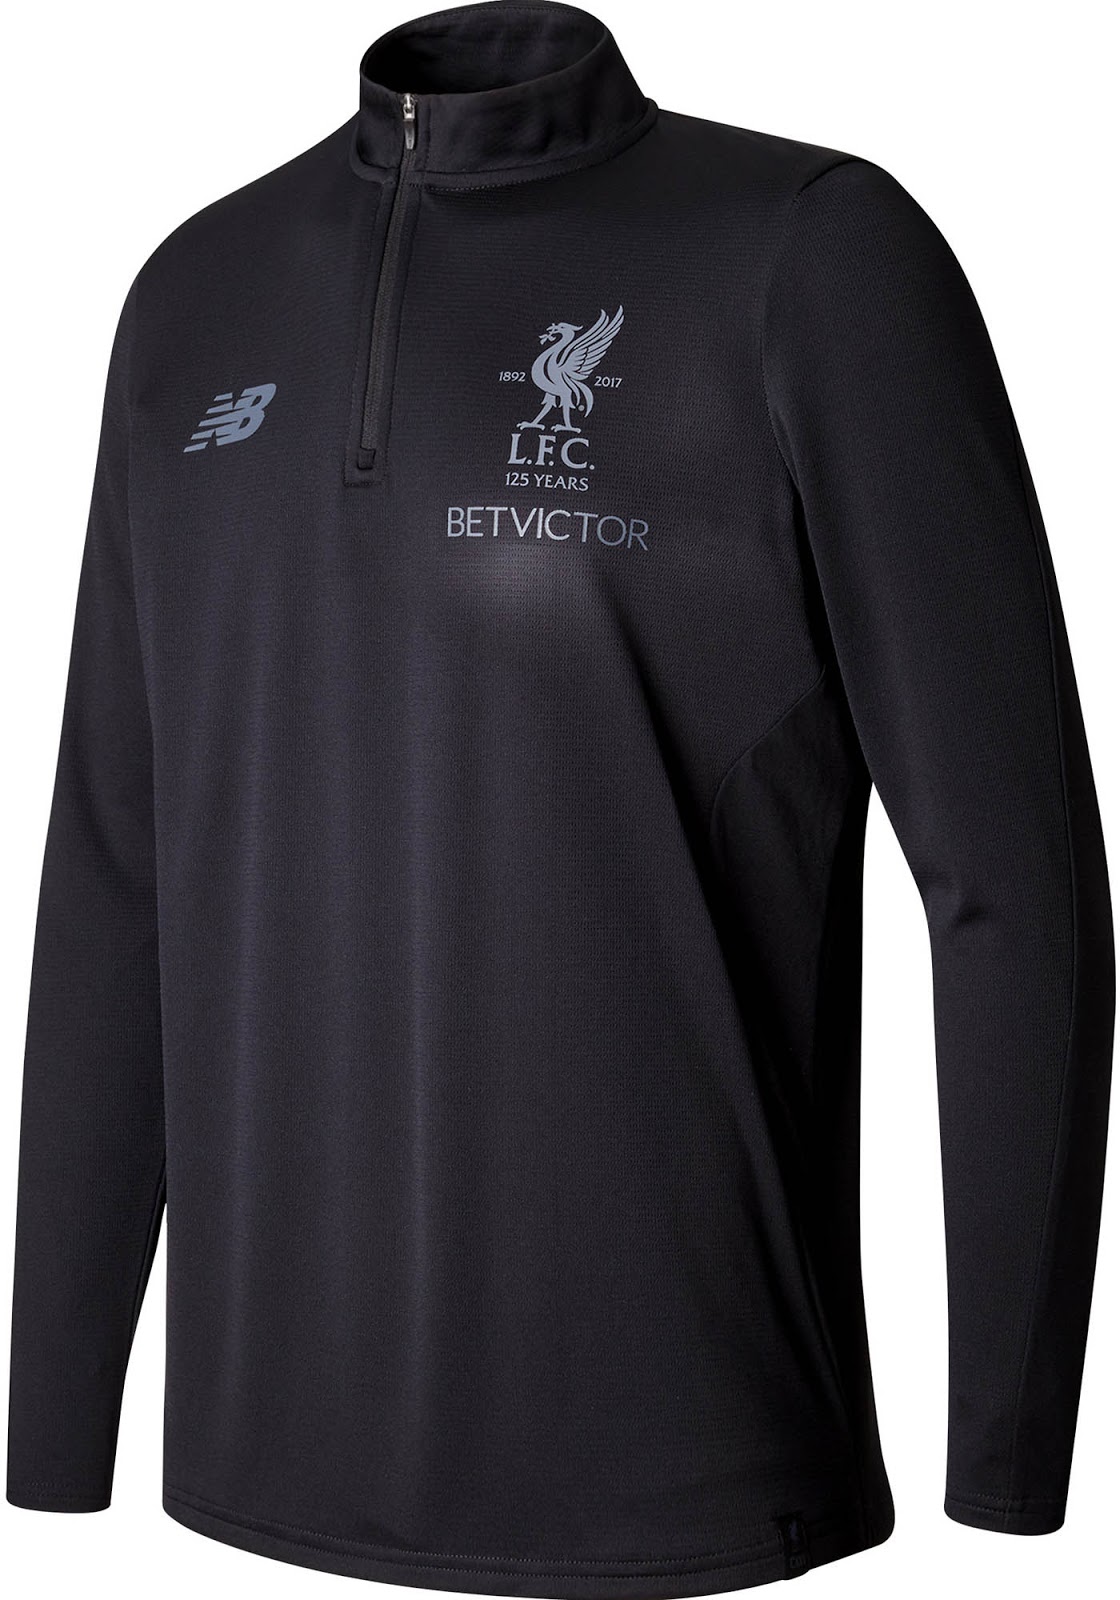 Tulpen Carry Goed gevoel Liverpool 17-18 Training and Pre-Match Shirts Released - Footy Headlines